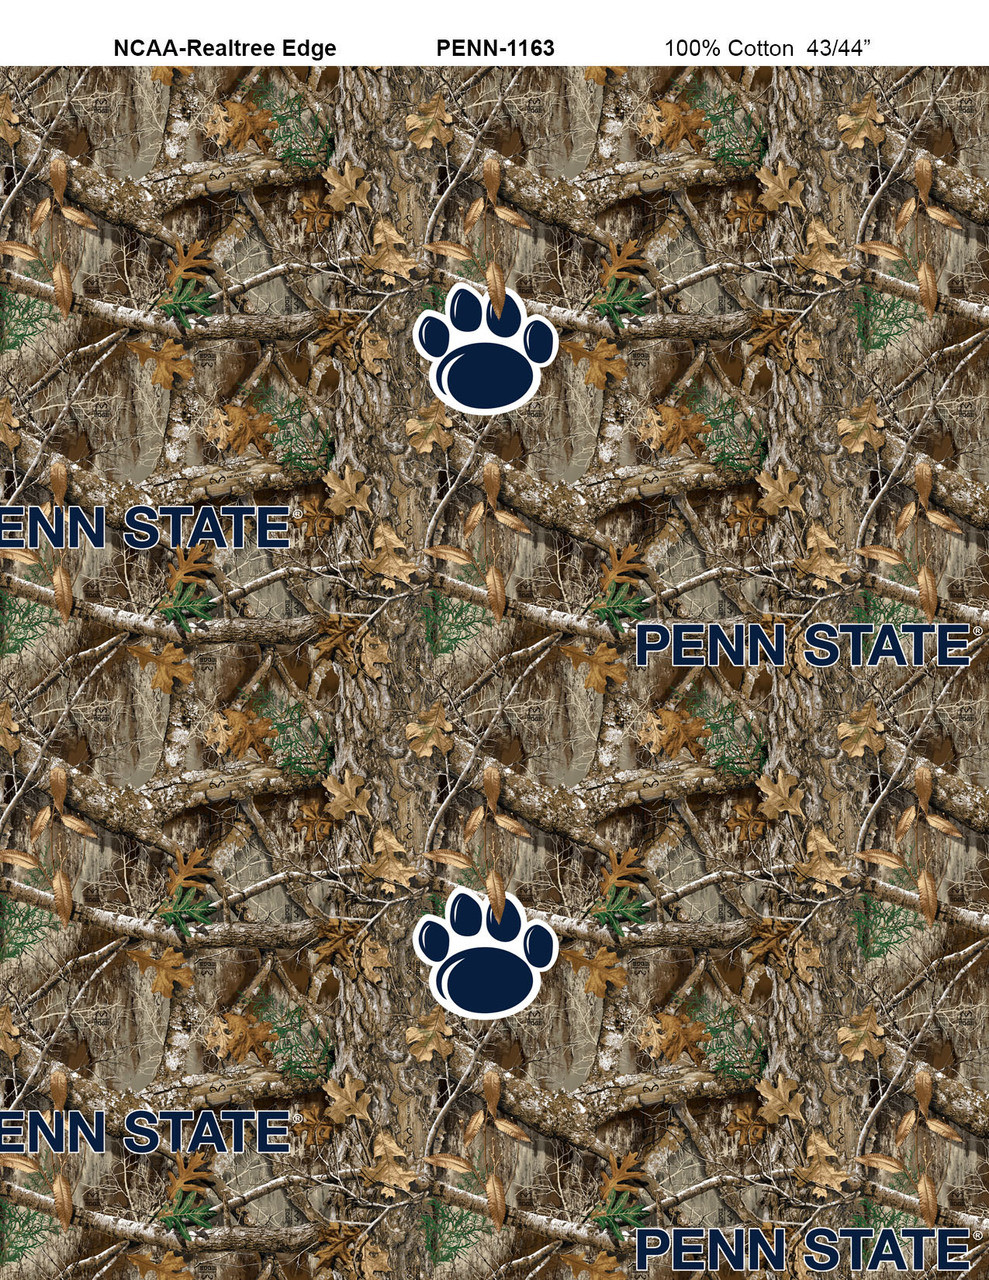 Penn State Nittany Lions Cotton Fabric with Realtree Camo Print or Matching Solid Cotton Fabrics